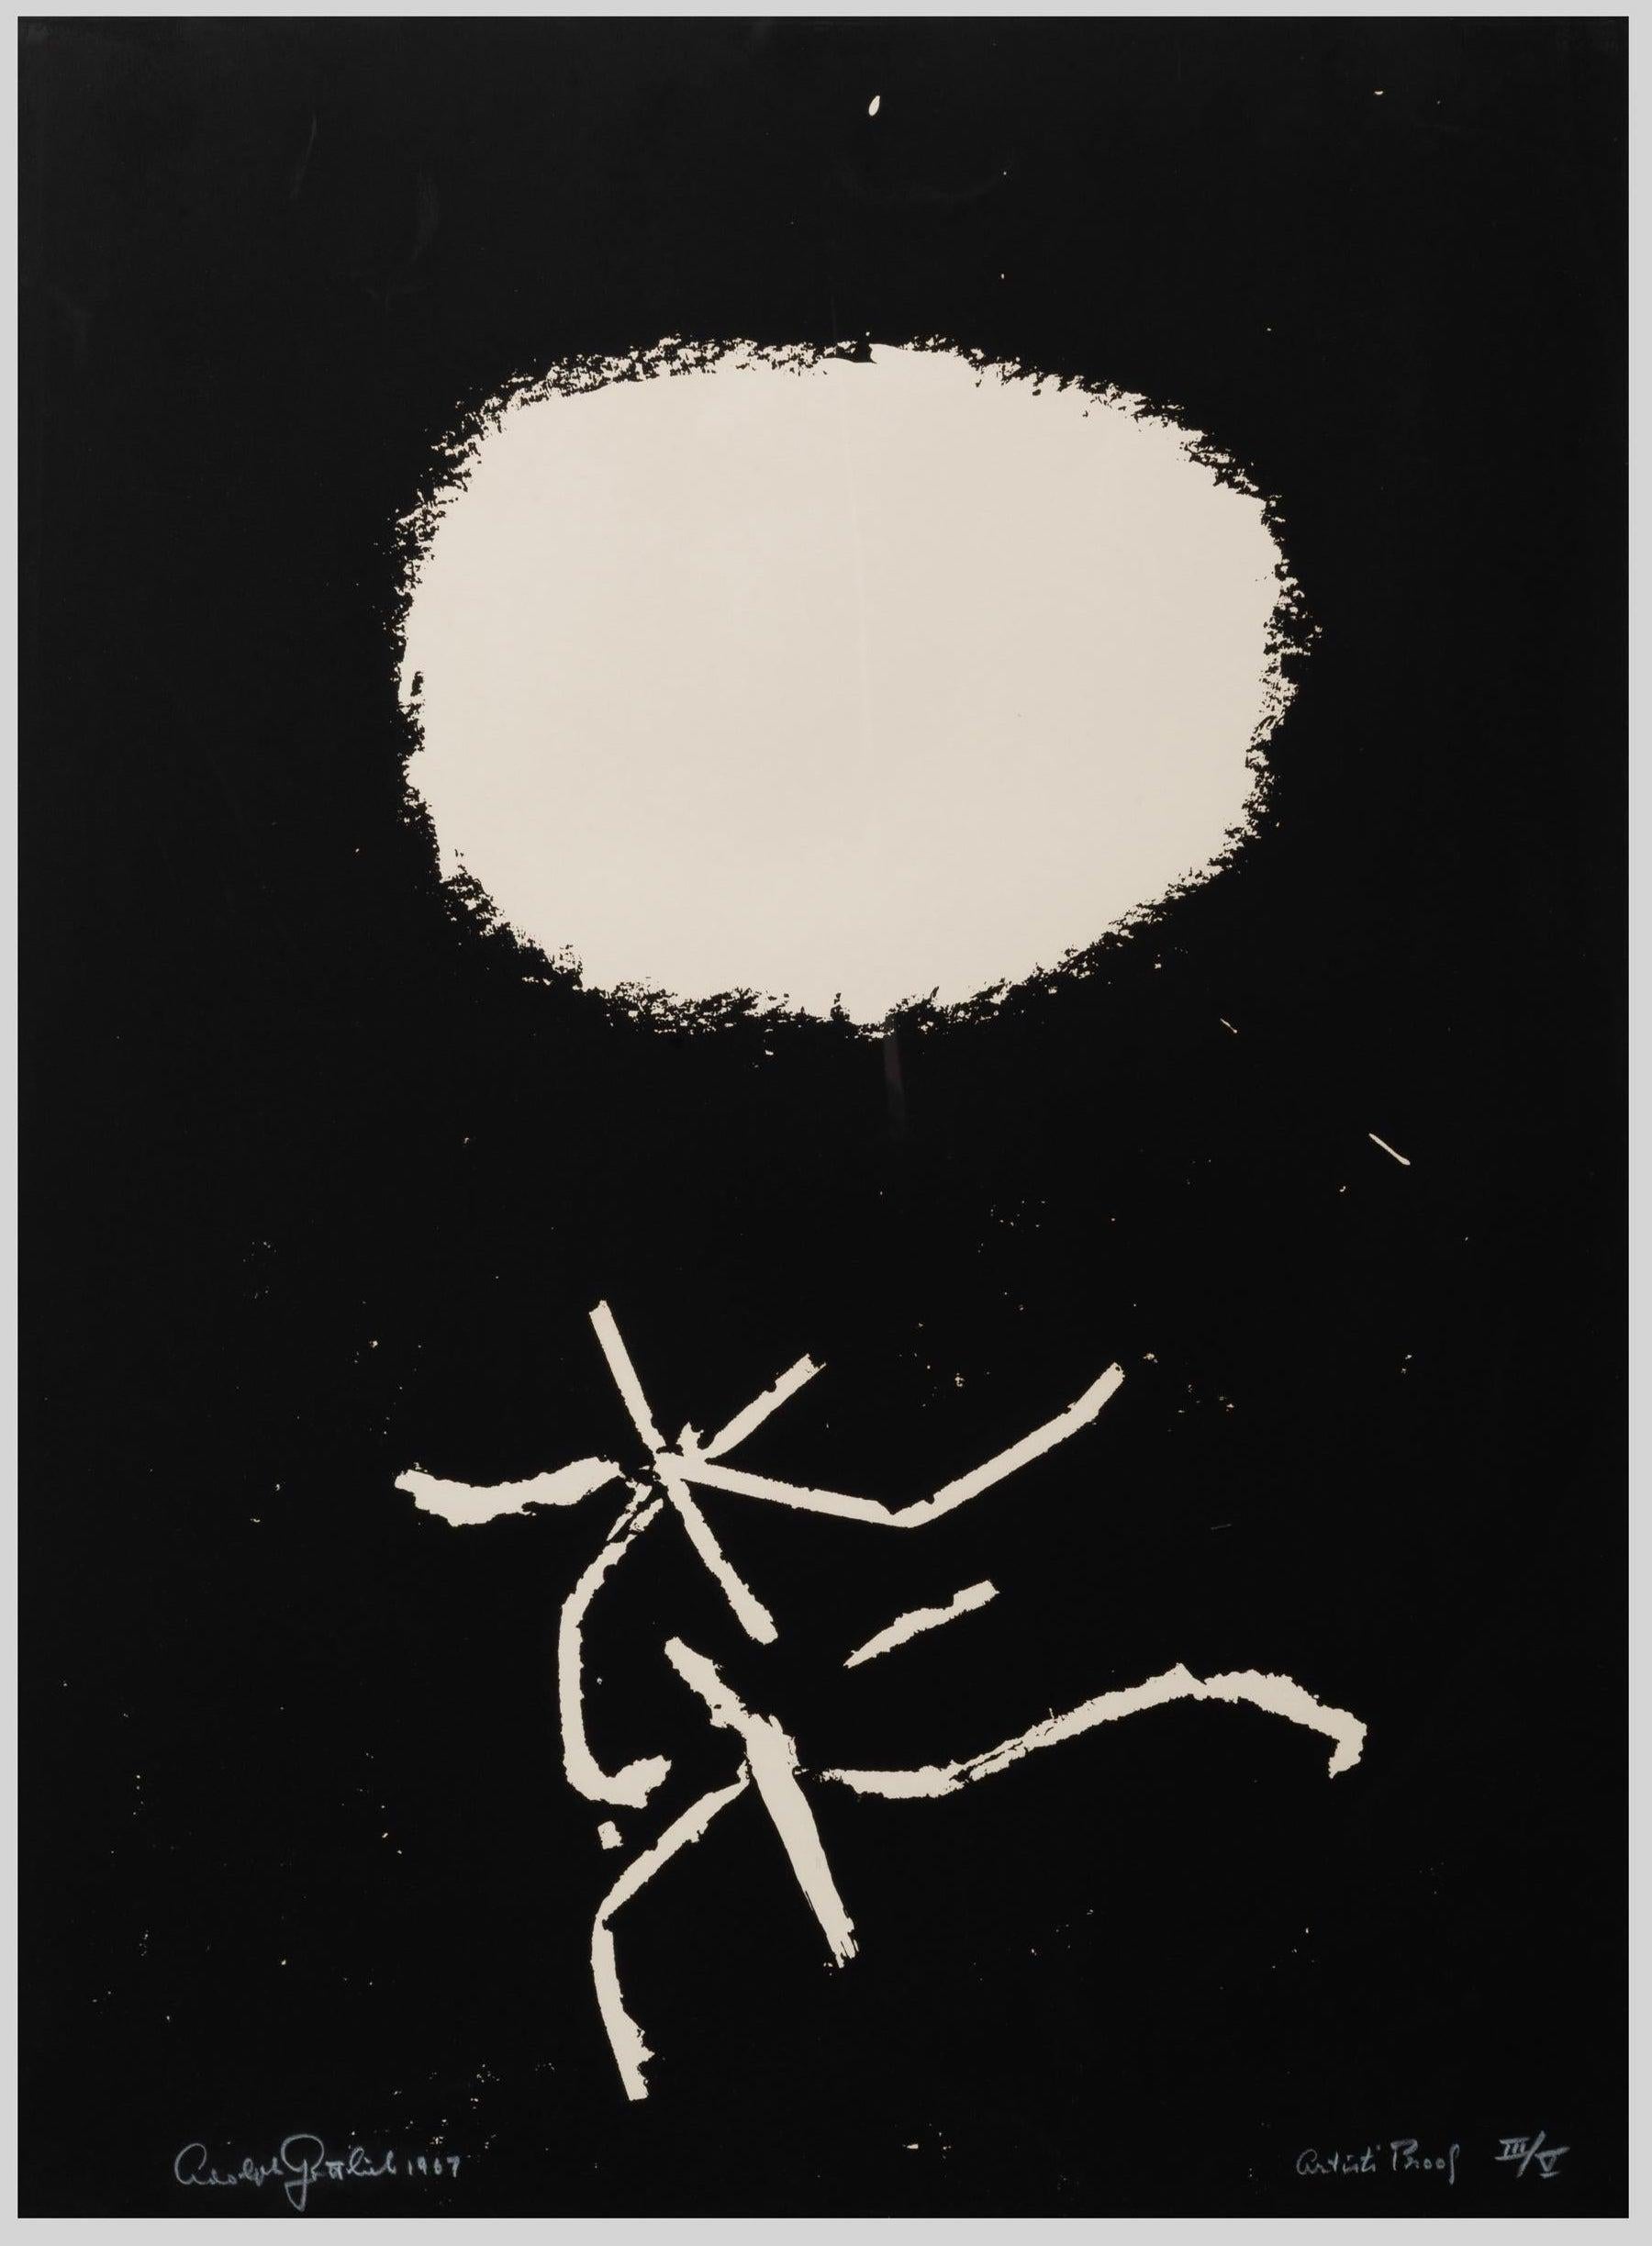 Adolph Gottlieb Abstract Print - Flying Lines